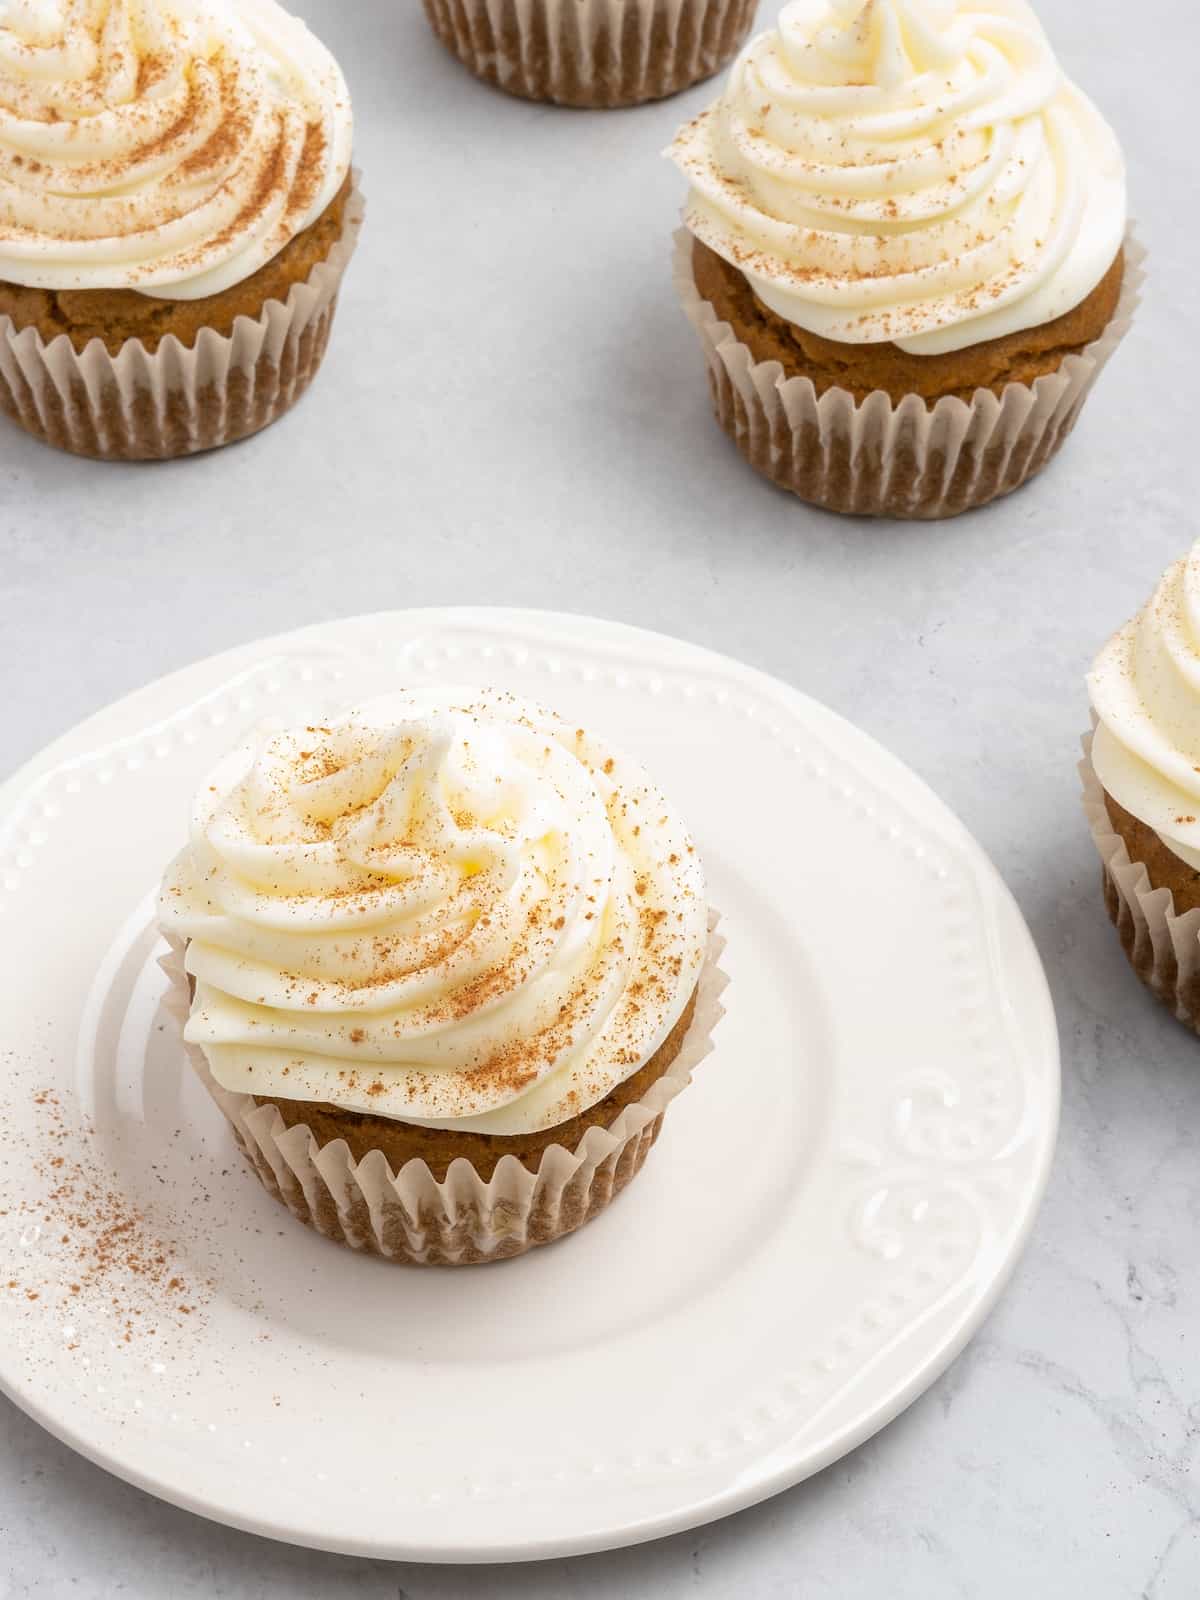 A frosted gluten free pumpkin cupcake sprinkled with cinnamon on a plate, surrounded by more frosted cupcakes.